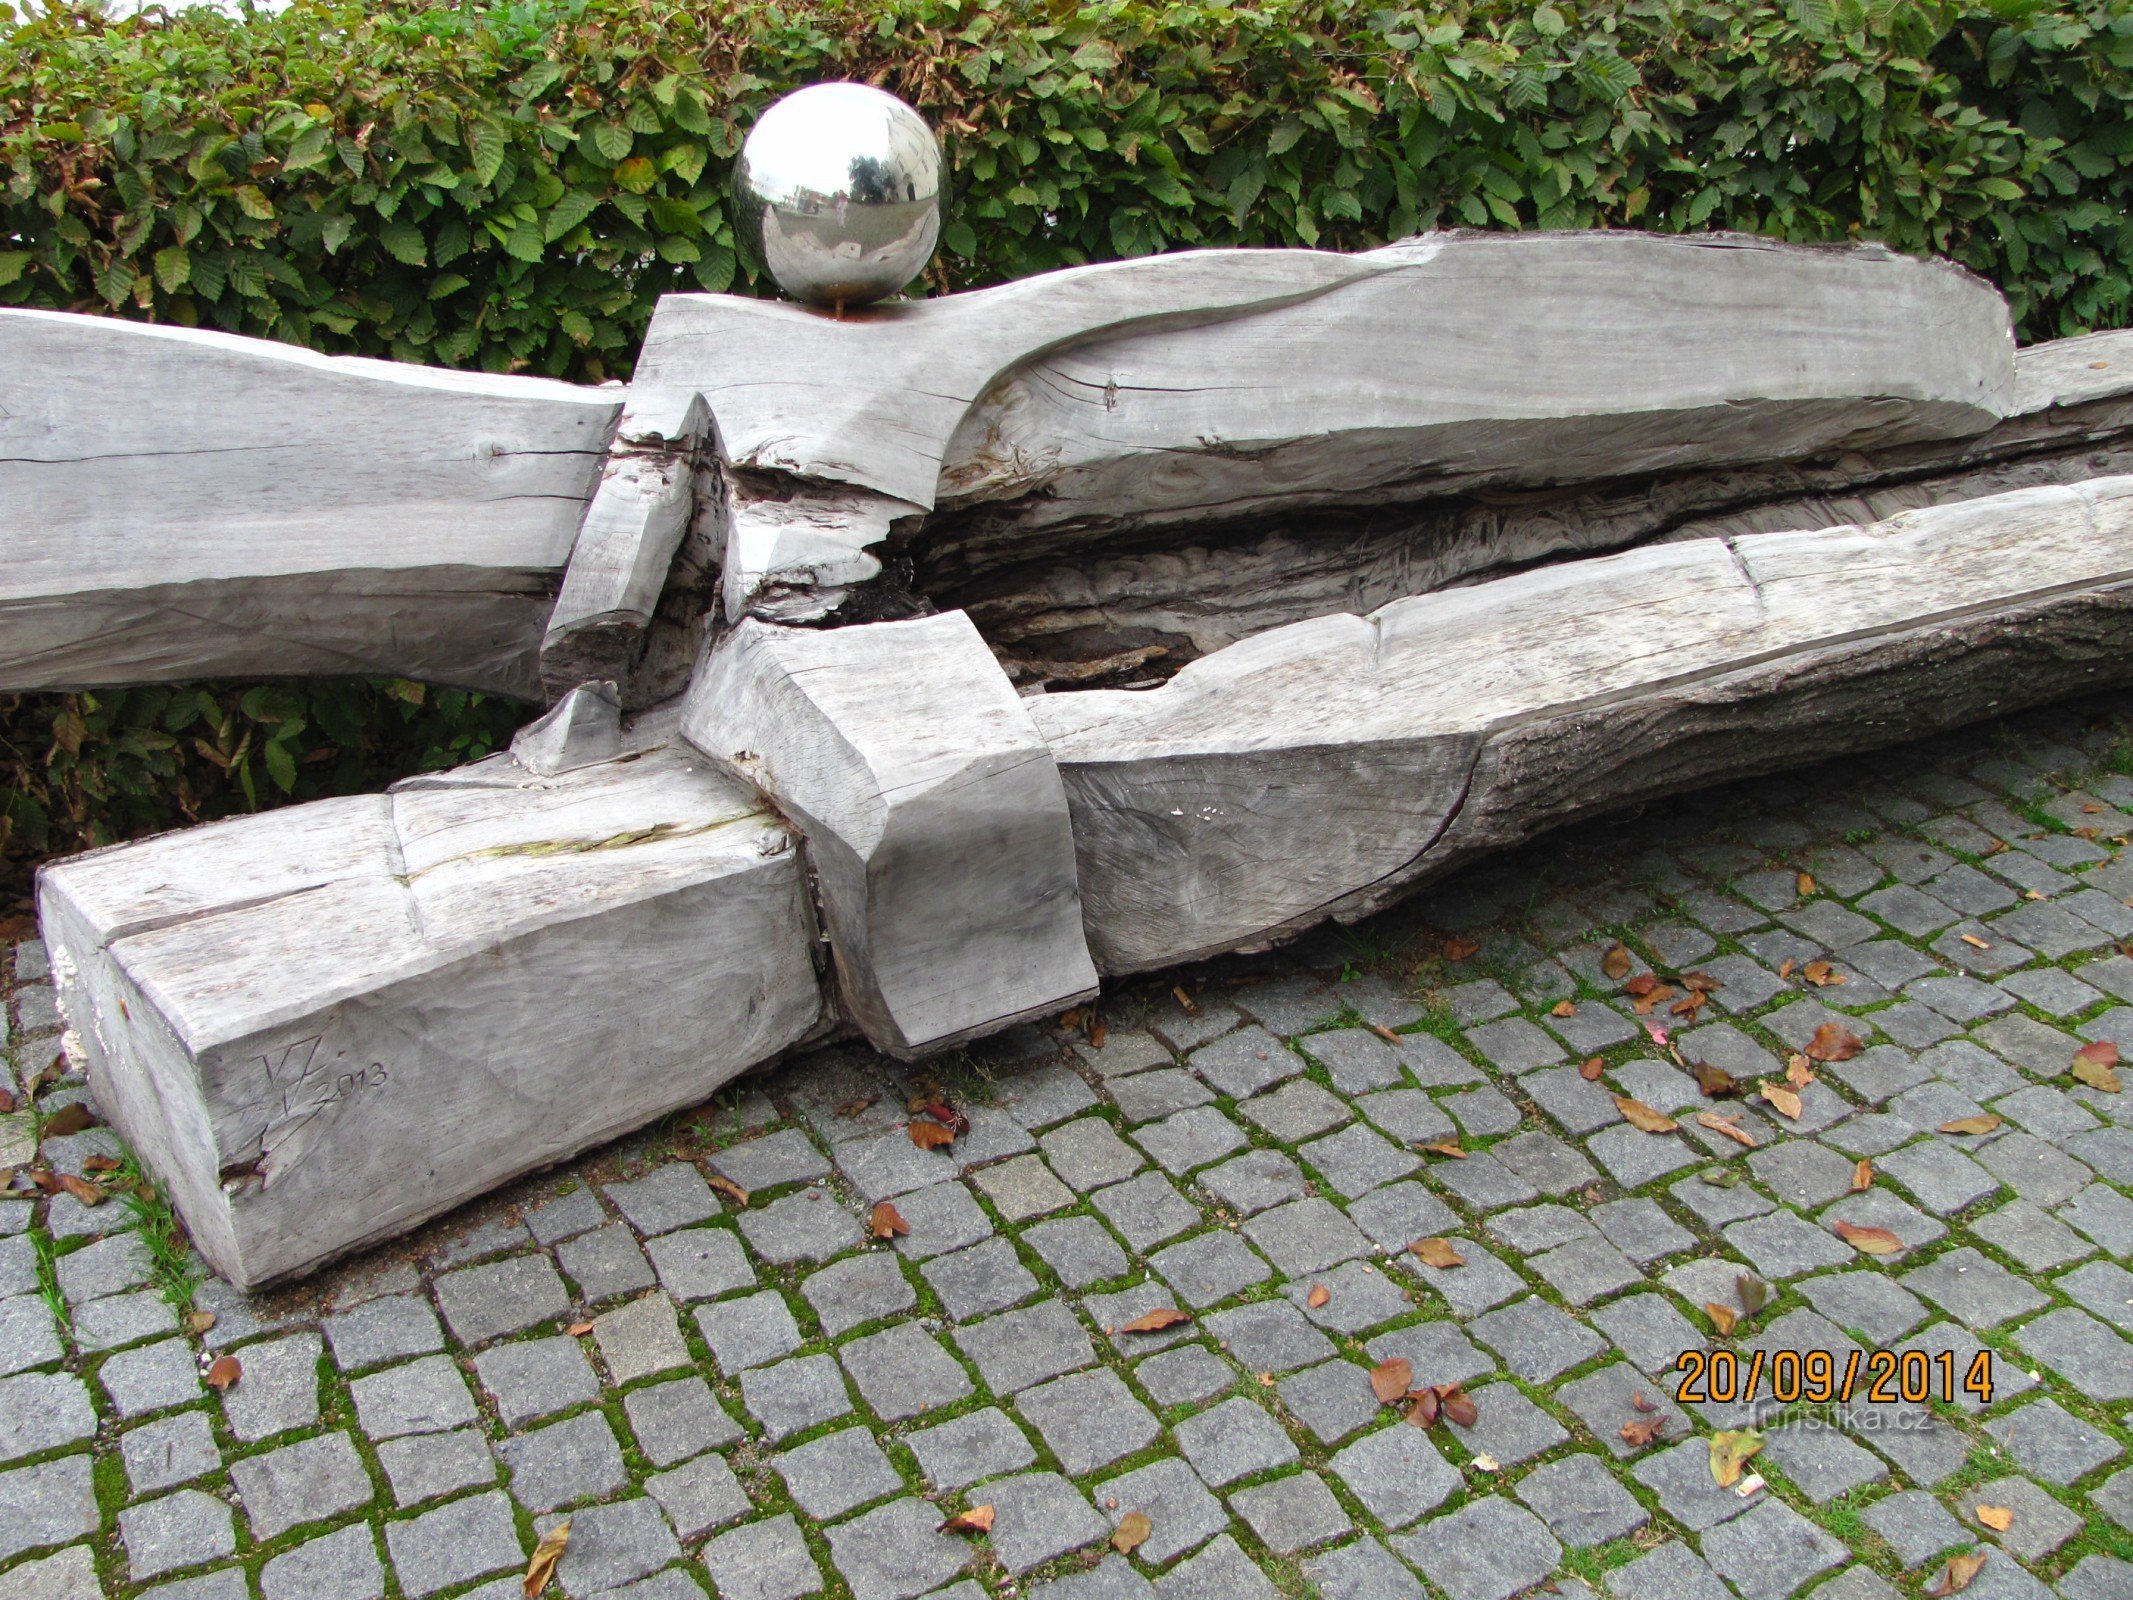 A bench on the square in Klimkovice